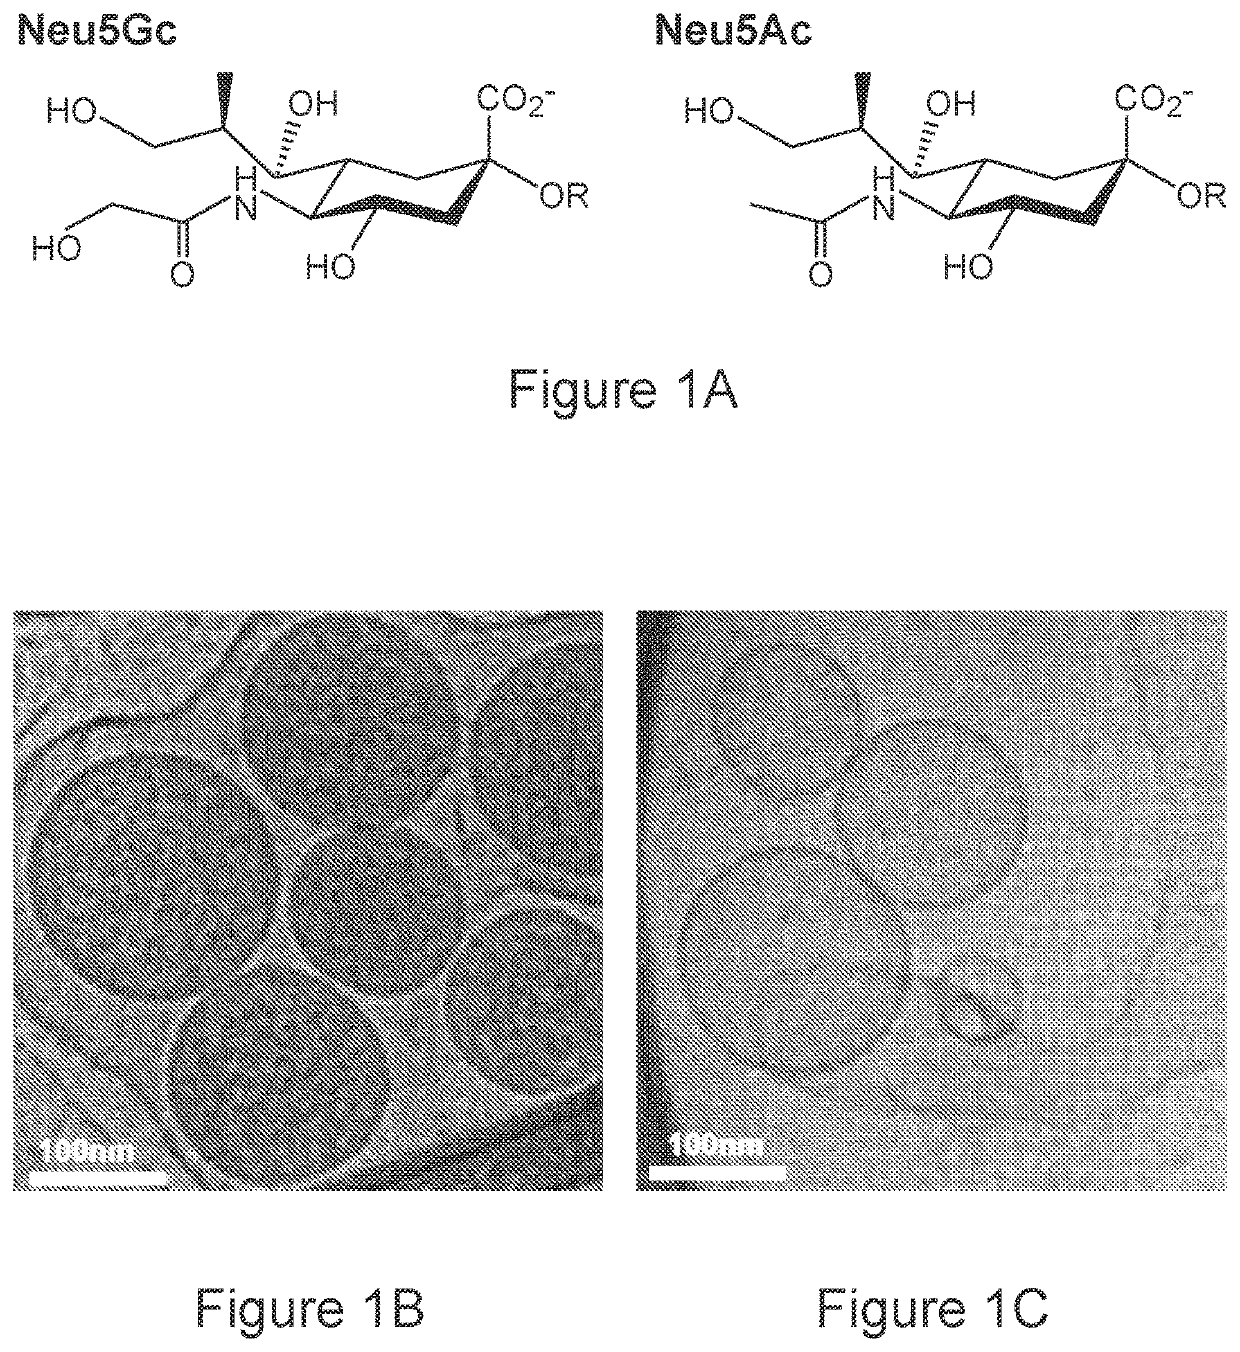 Immunogenic compositions containing n-glycol ylneuraminic acid bearing nanoparticles